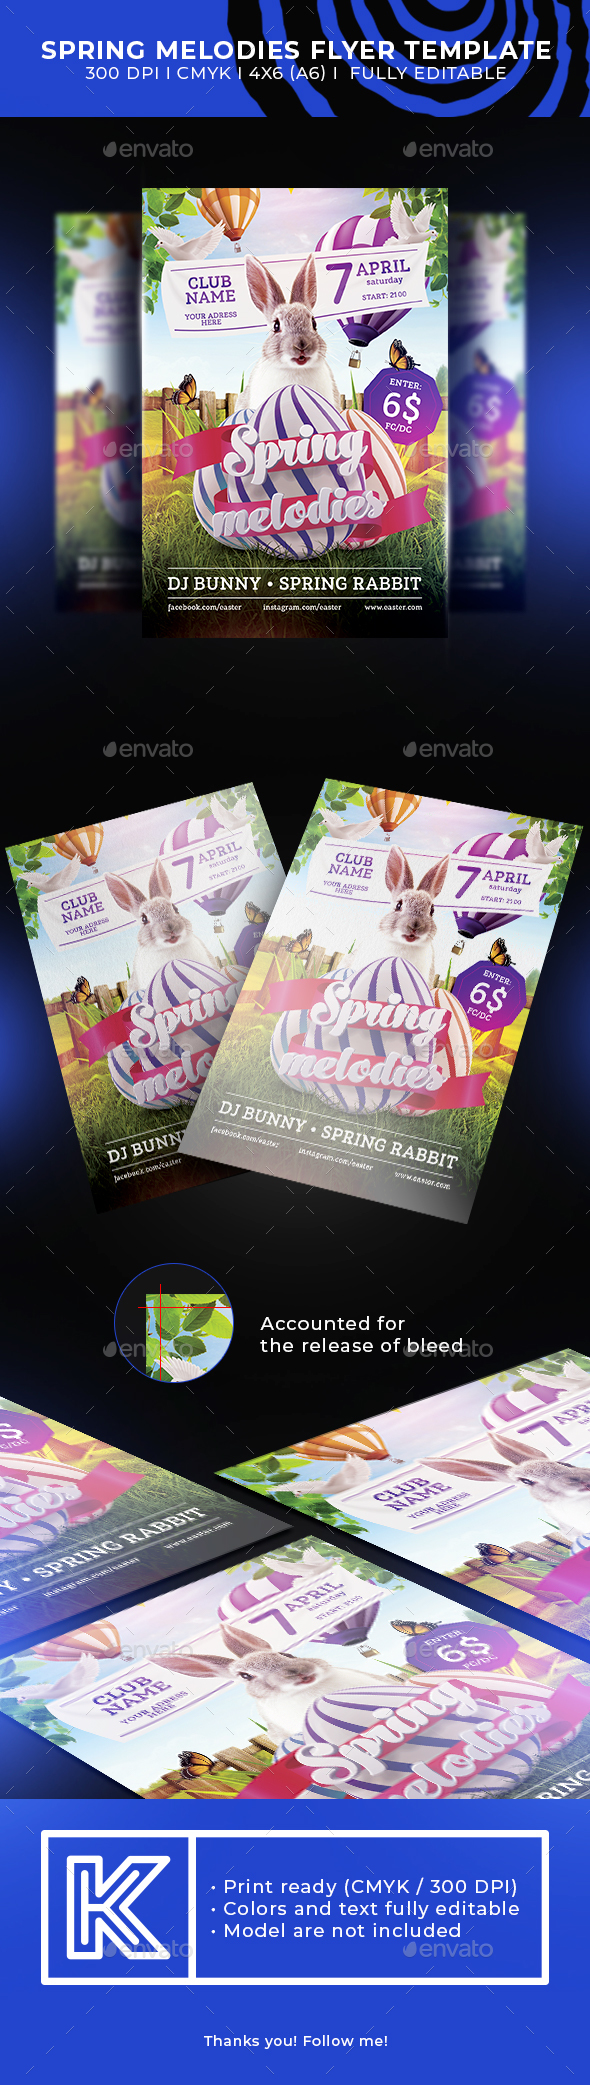 Spring melodies flyer template